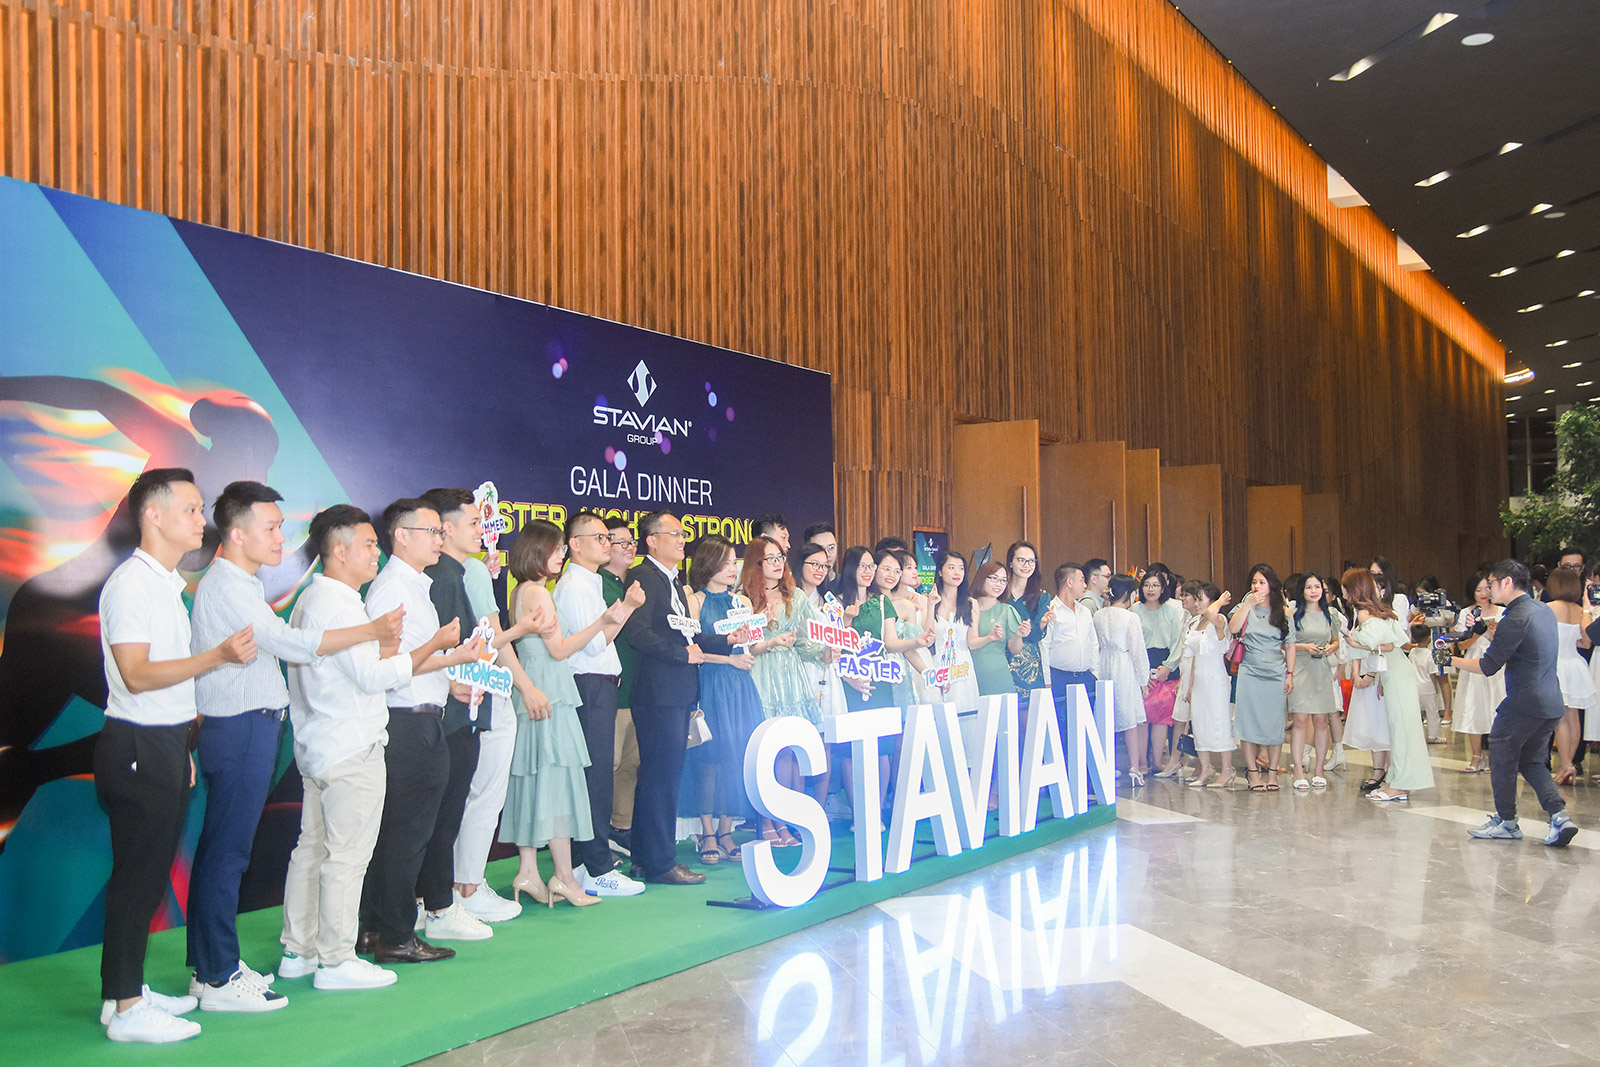 GALA DINNER OF STAVIAN COMPANY GATHERED 600 GUESTS AROUND THE WORLD